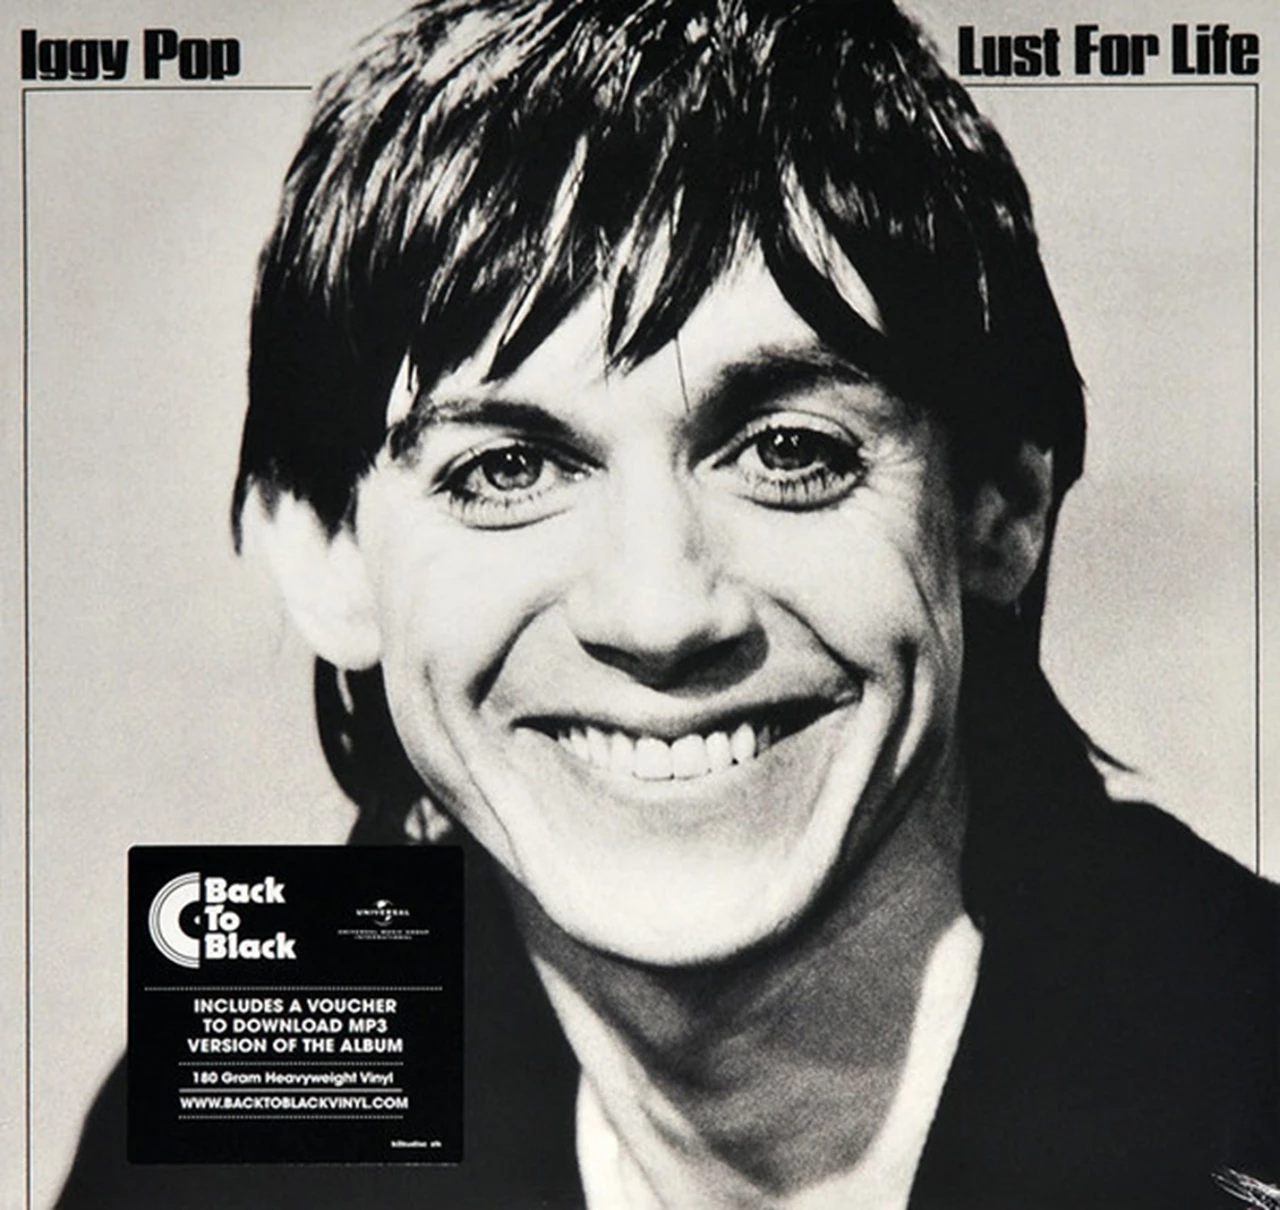 Lust For Life by Iggy Pop